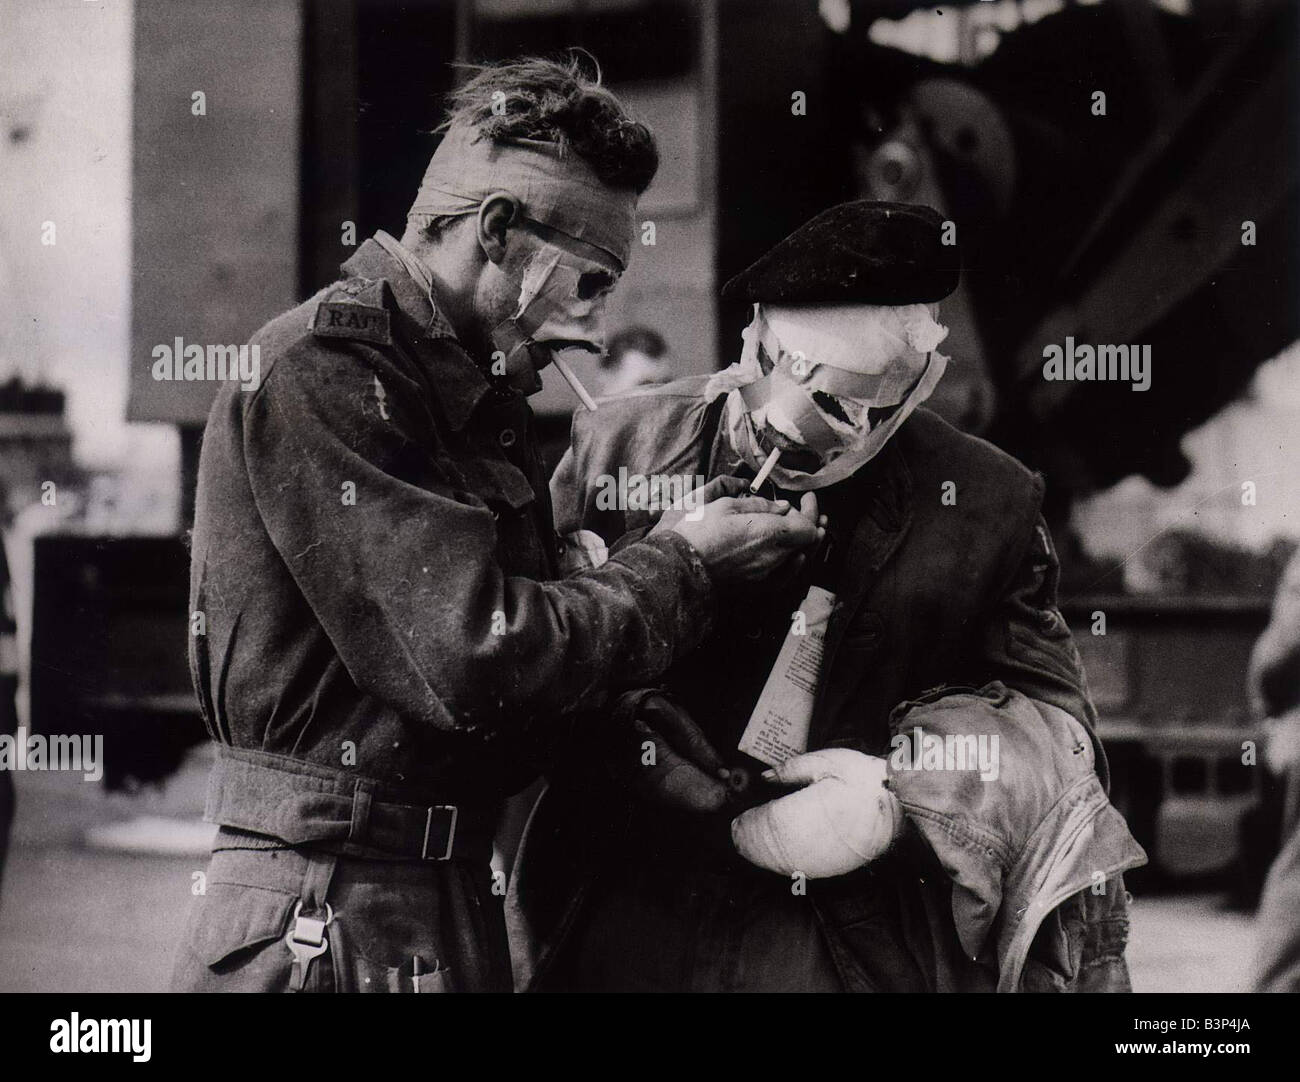 World War II Invasion of France Two soldiers casualties of the Normandy landings enjoy a cigarette after disembarking from the hospital ship Stock Photo